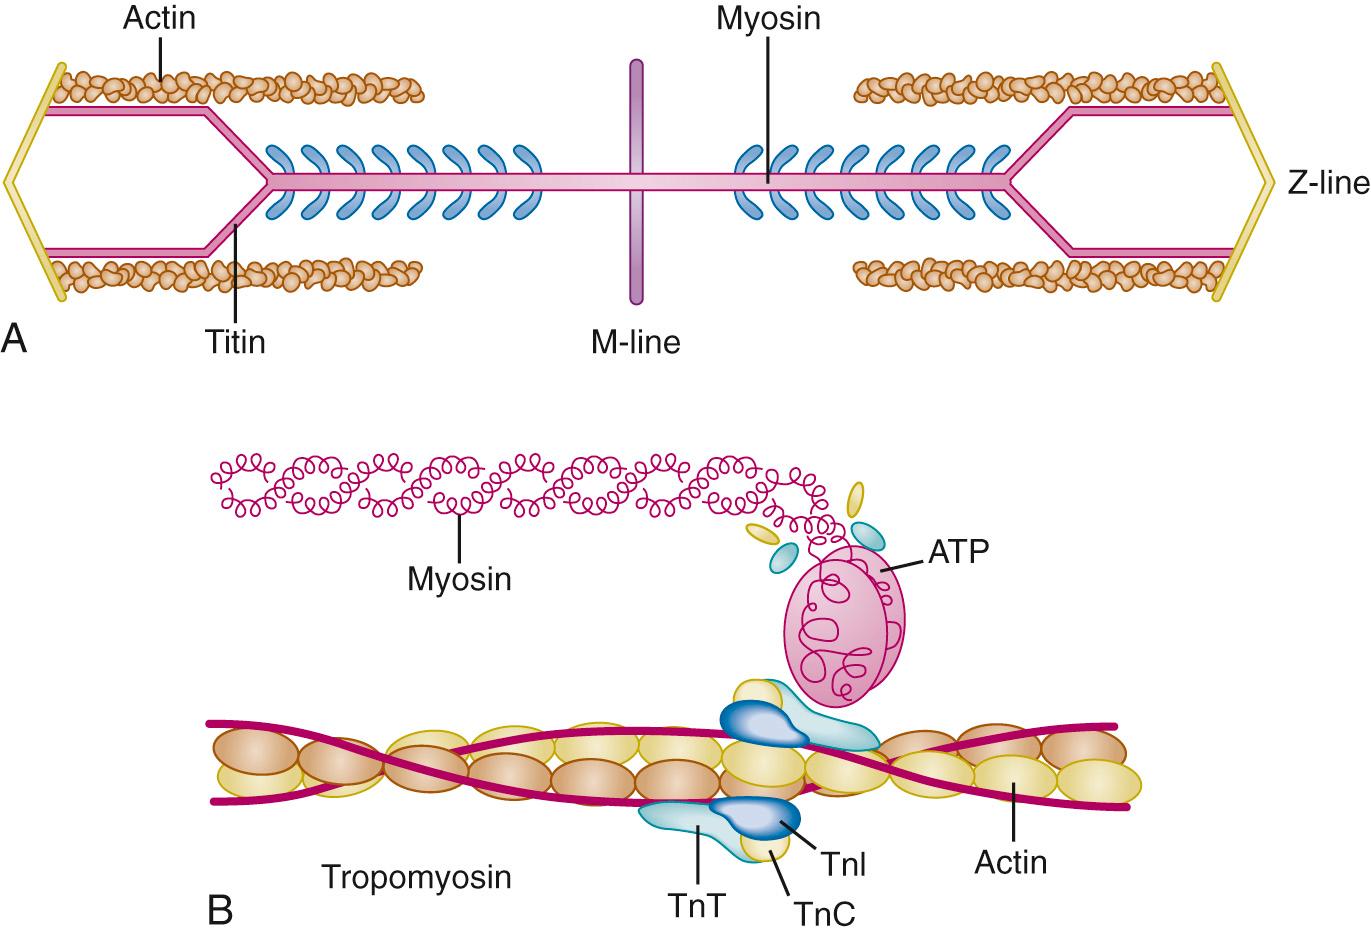 Fig. 23.5, Schematic representation of the cardiac sarcomere (A) showing orientation of the structural elements (titin, M-line, Z-line) and contractile elements (actin and myosin). B, An expanded view of the site for actin-myosin interaction. In the absence of calcium ions (Ca 2+ ), tropomyosin prevents the interaction between the myosin head and actin. Binding of Ca 2+ to the troponin C (TnC) component of a complex also containing troponin T (TnT) and troponin I (TnI) removes the inhibitory effect of tropomyosin allowing for actin-myosin interaction, adenosine triphosphate (ATP) hydrolysis, and cross-bridge formation.